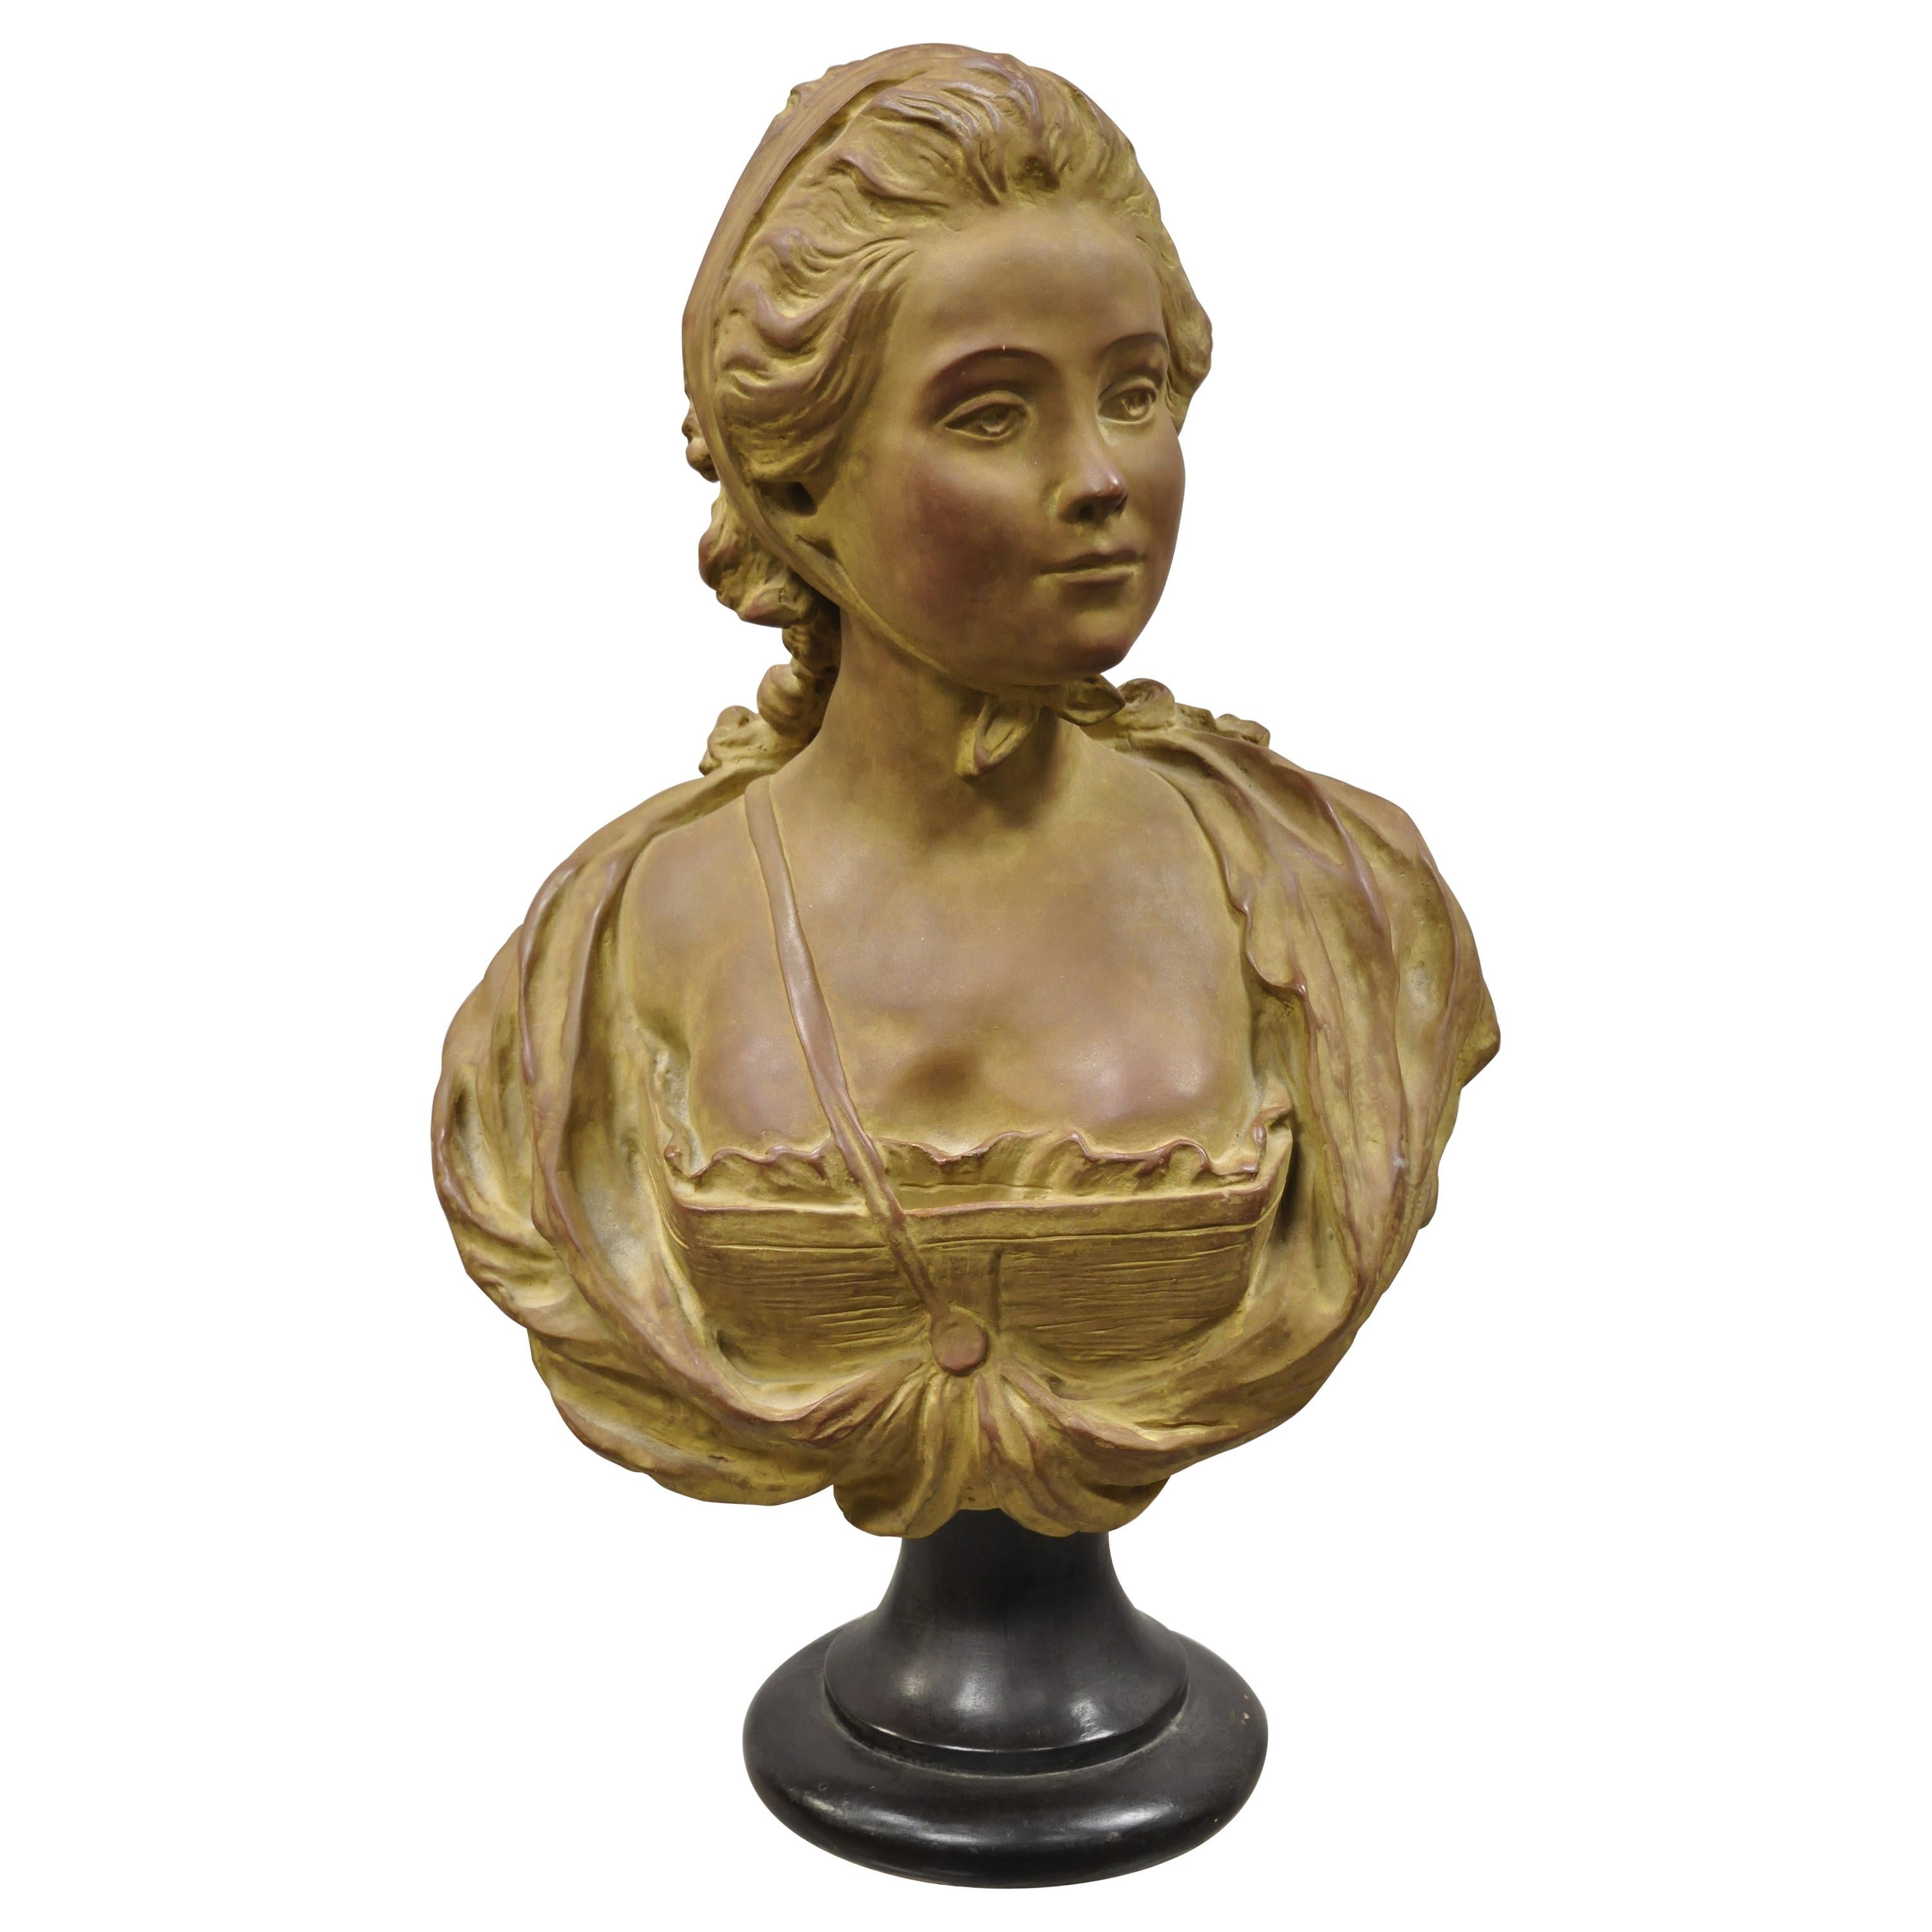 French Terracotta Bust of Young Woman Sculpture after A. Conord, 1763